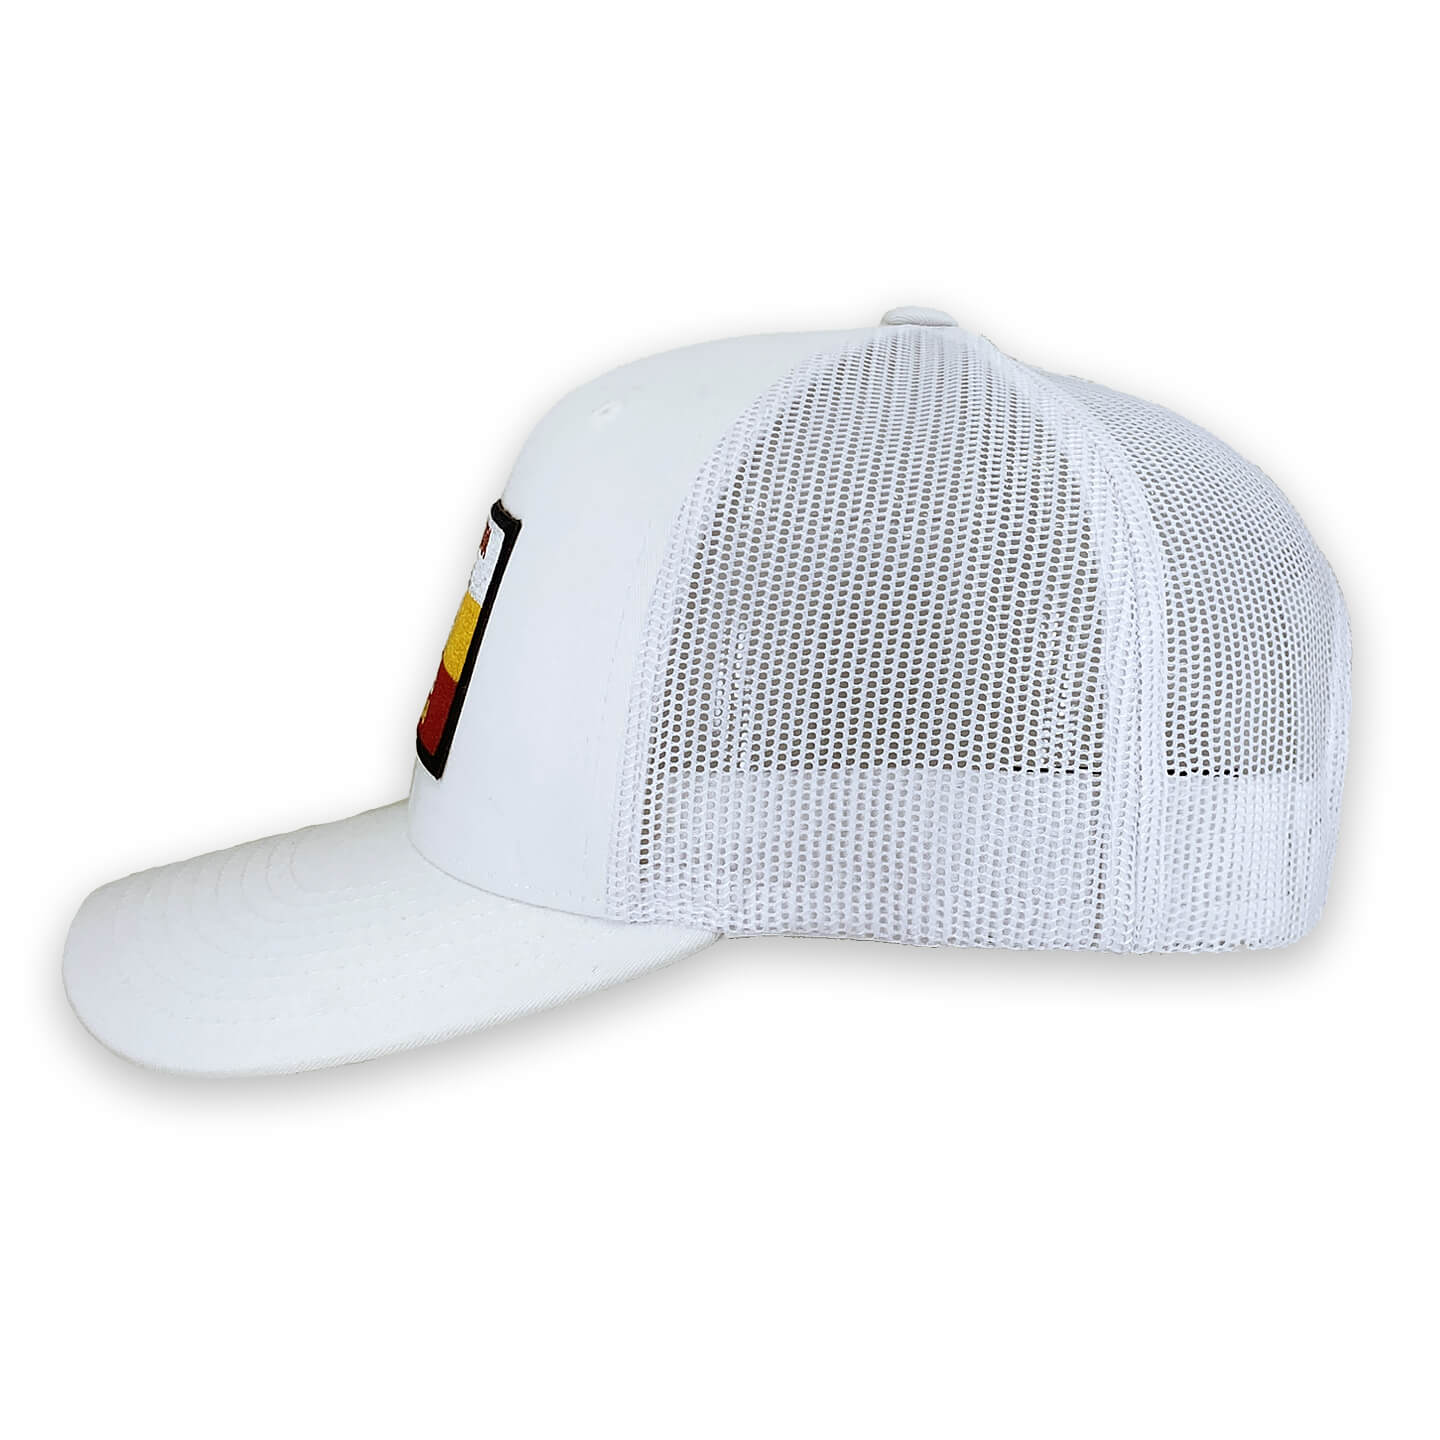 White 6 panel snapback trucker hat with Maroon and Gold Est'd patch side view